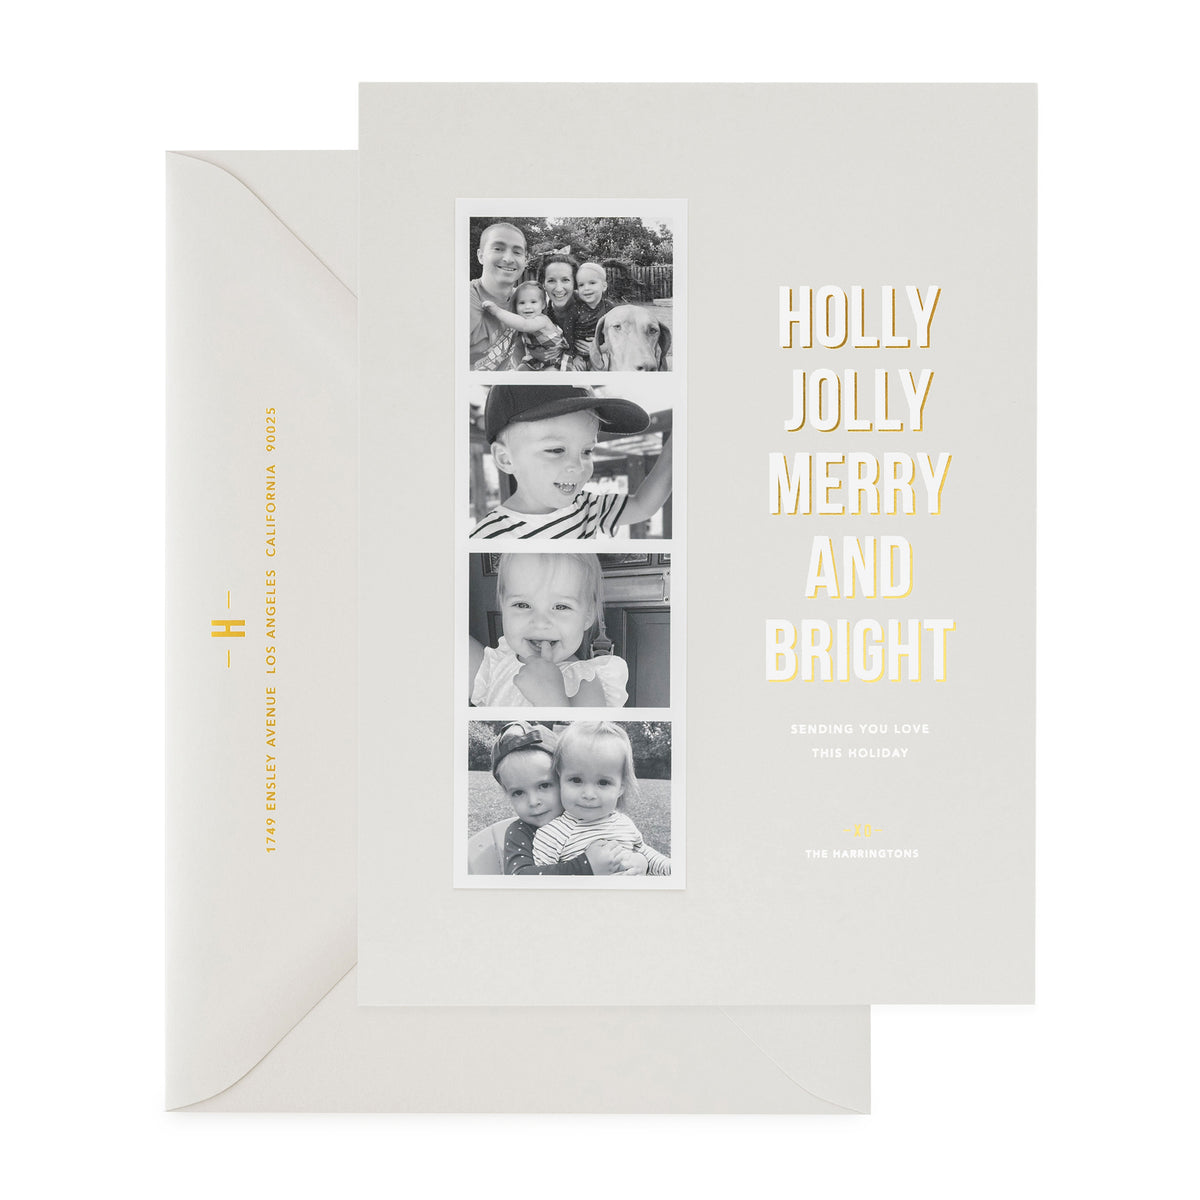 Grey holiday photo card with photo strip with Holly Jolly Merry and Bright showing gold foil address on envelope